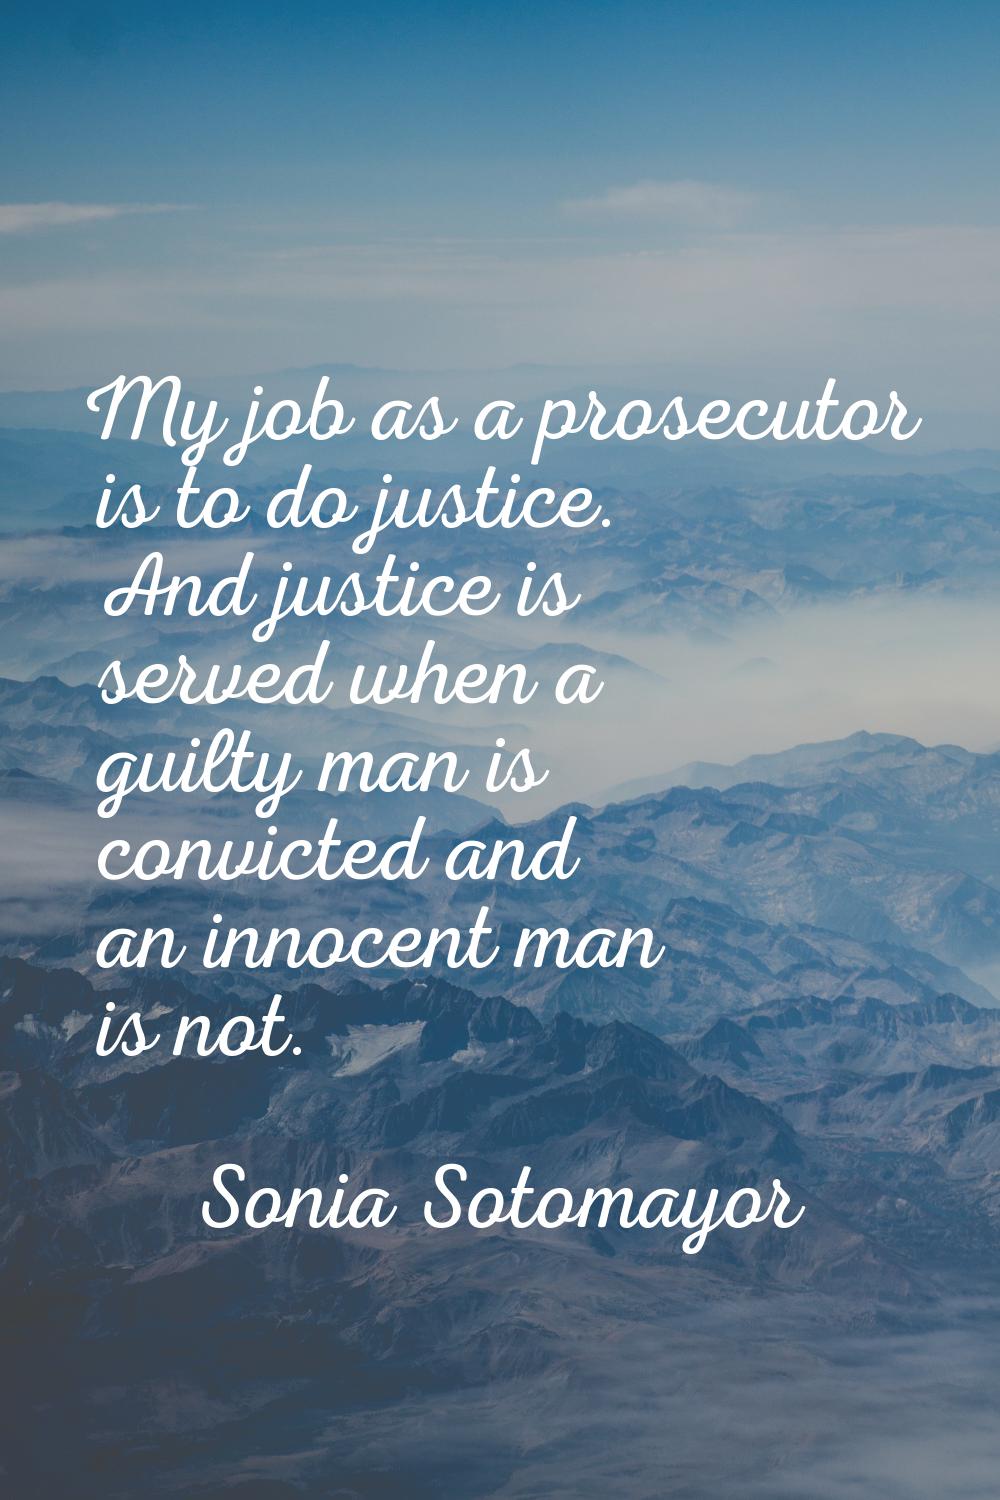 My job as a prosecutor is to do justice. And justice is served when a guilty man is convicted and a